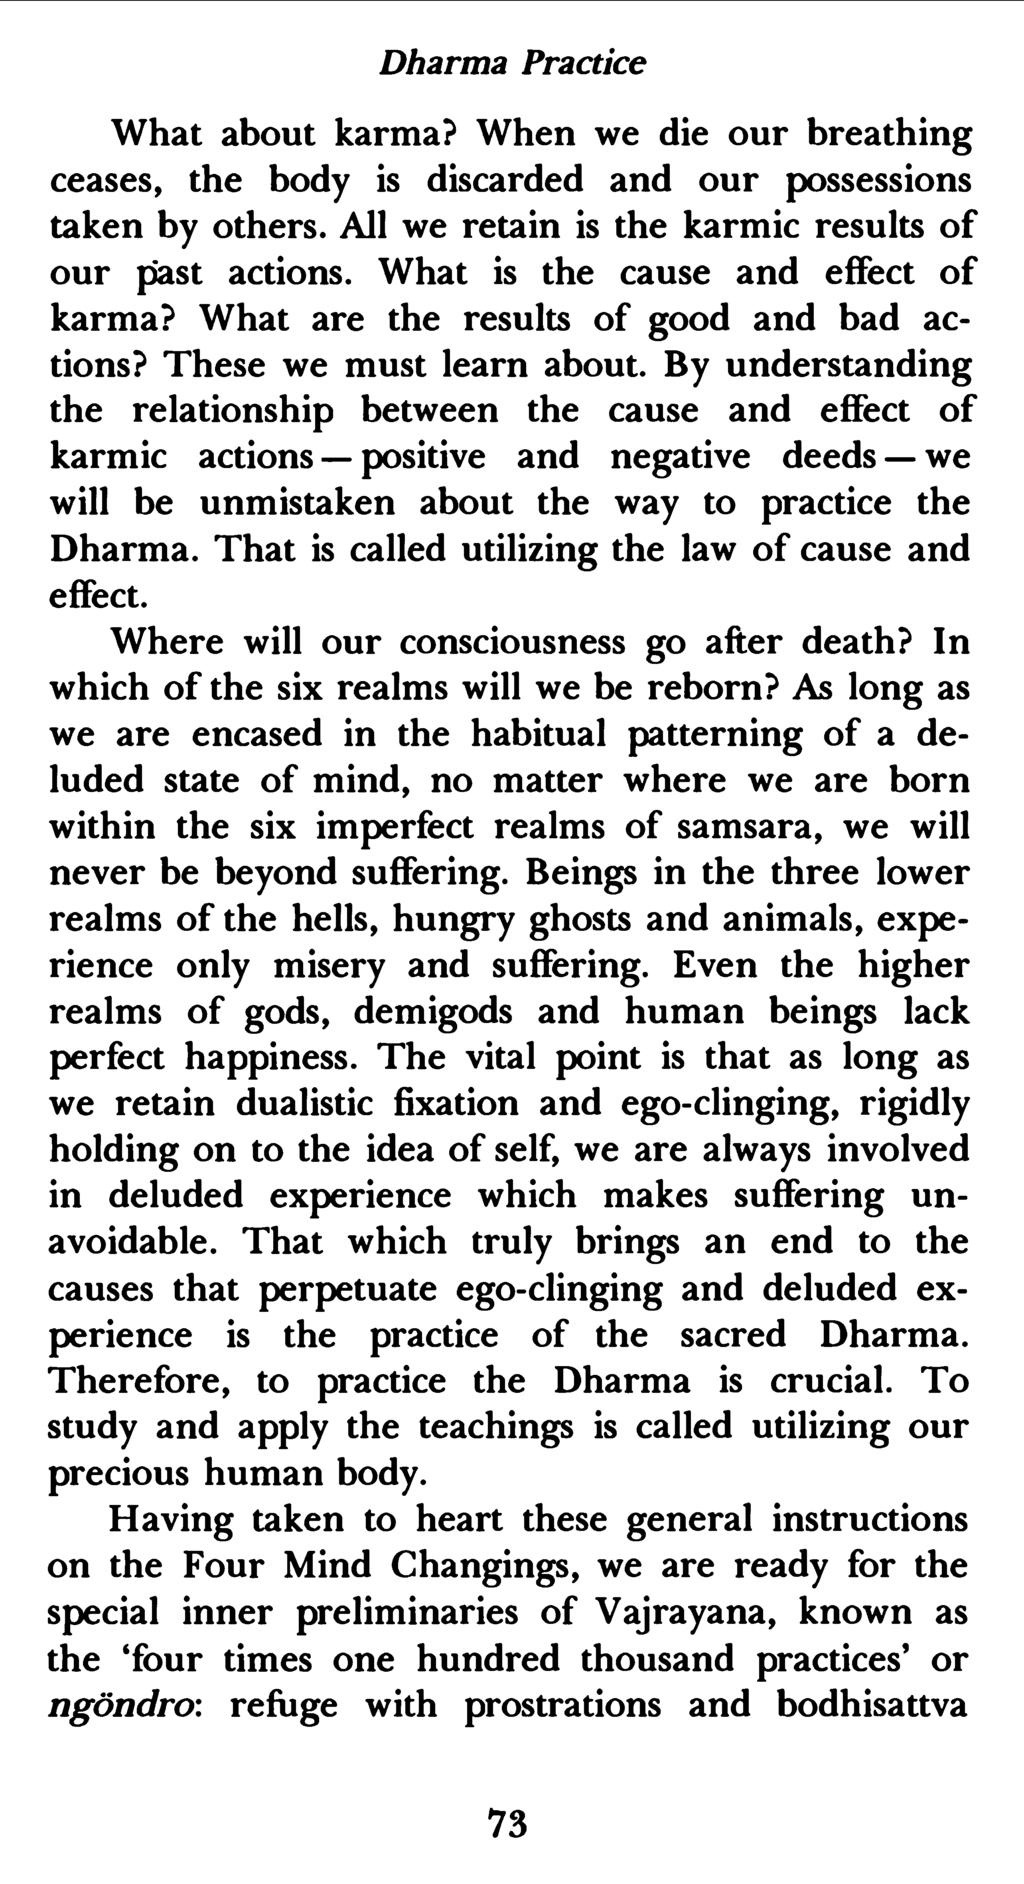 Dharma Practice What about karma? When we die our breathing ceases, the body is discarded and our possessions taken by others. All we retain is the karmic results of our past actions.